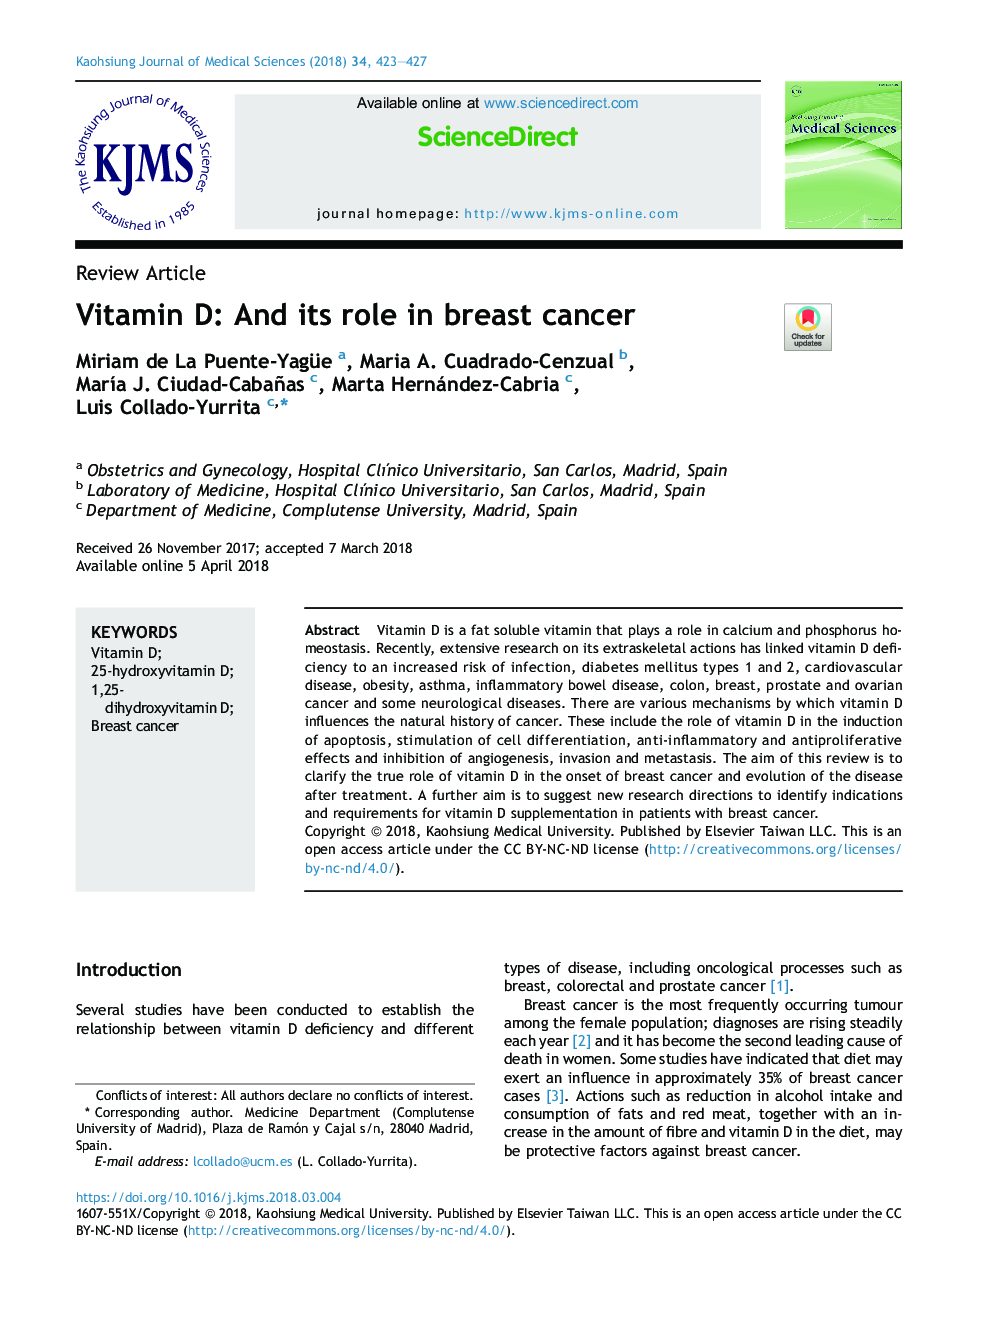 Vitamin D: And its role in breast cancer